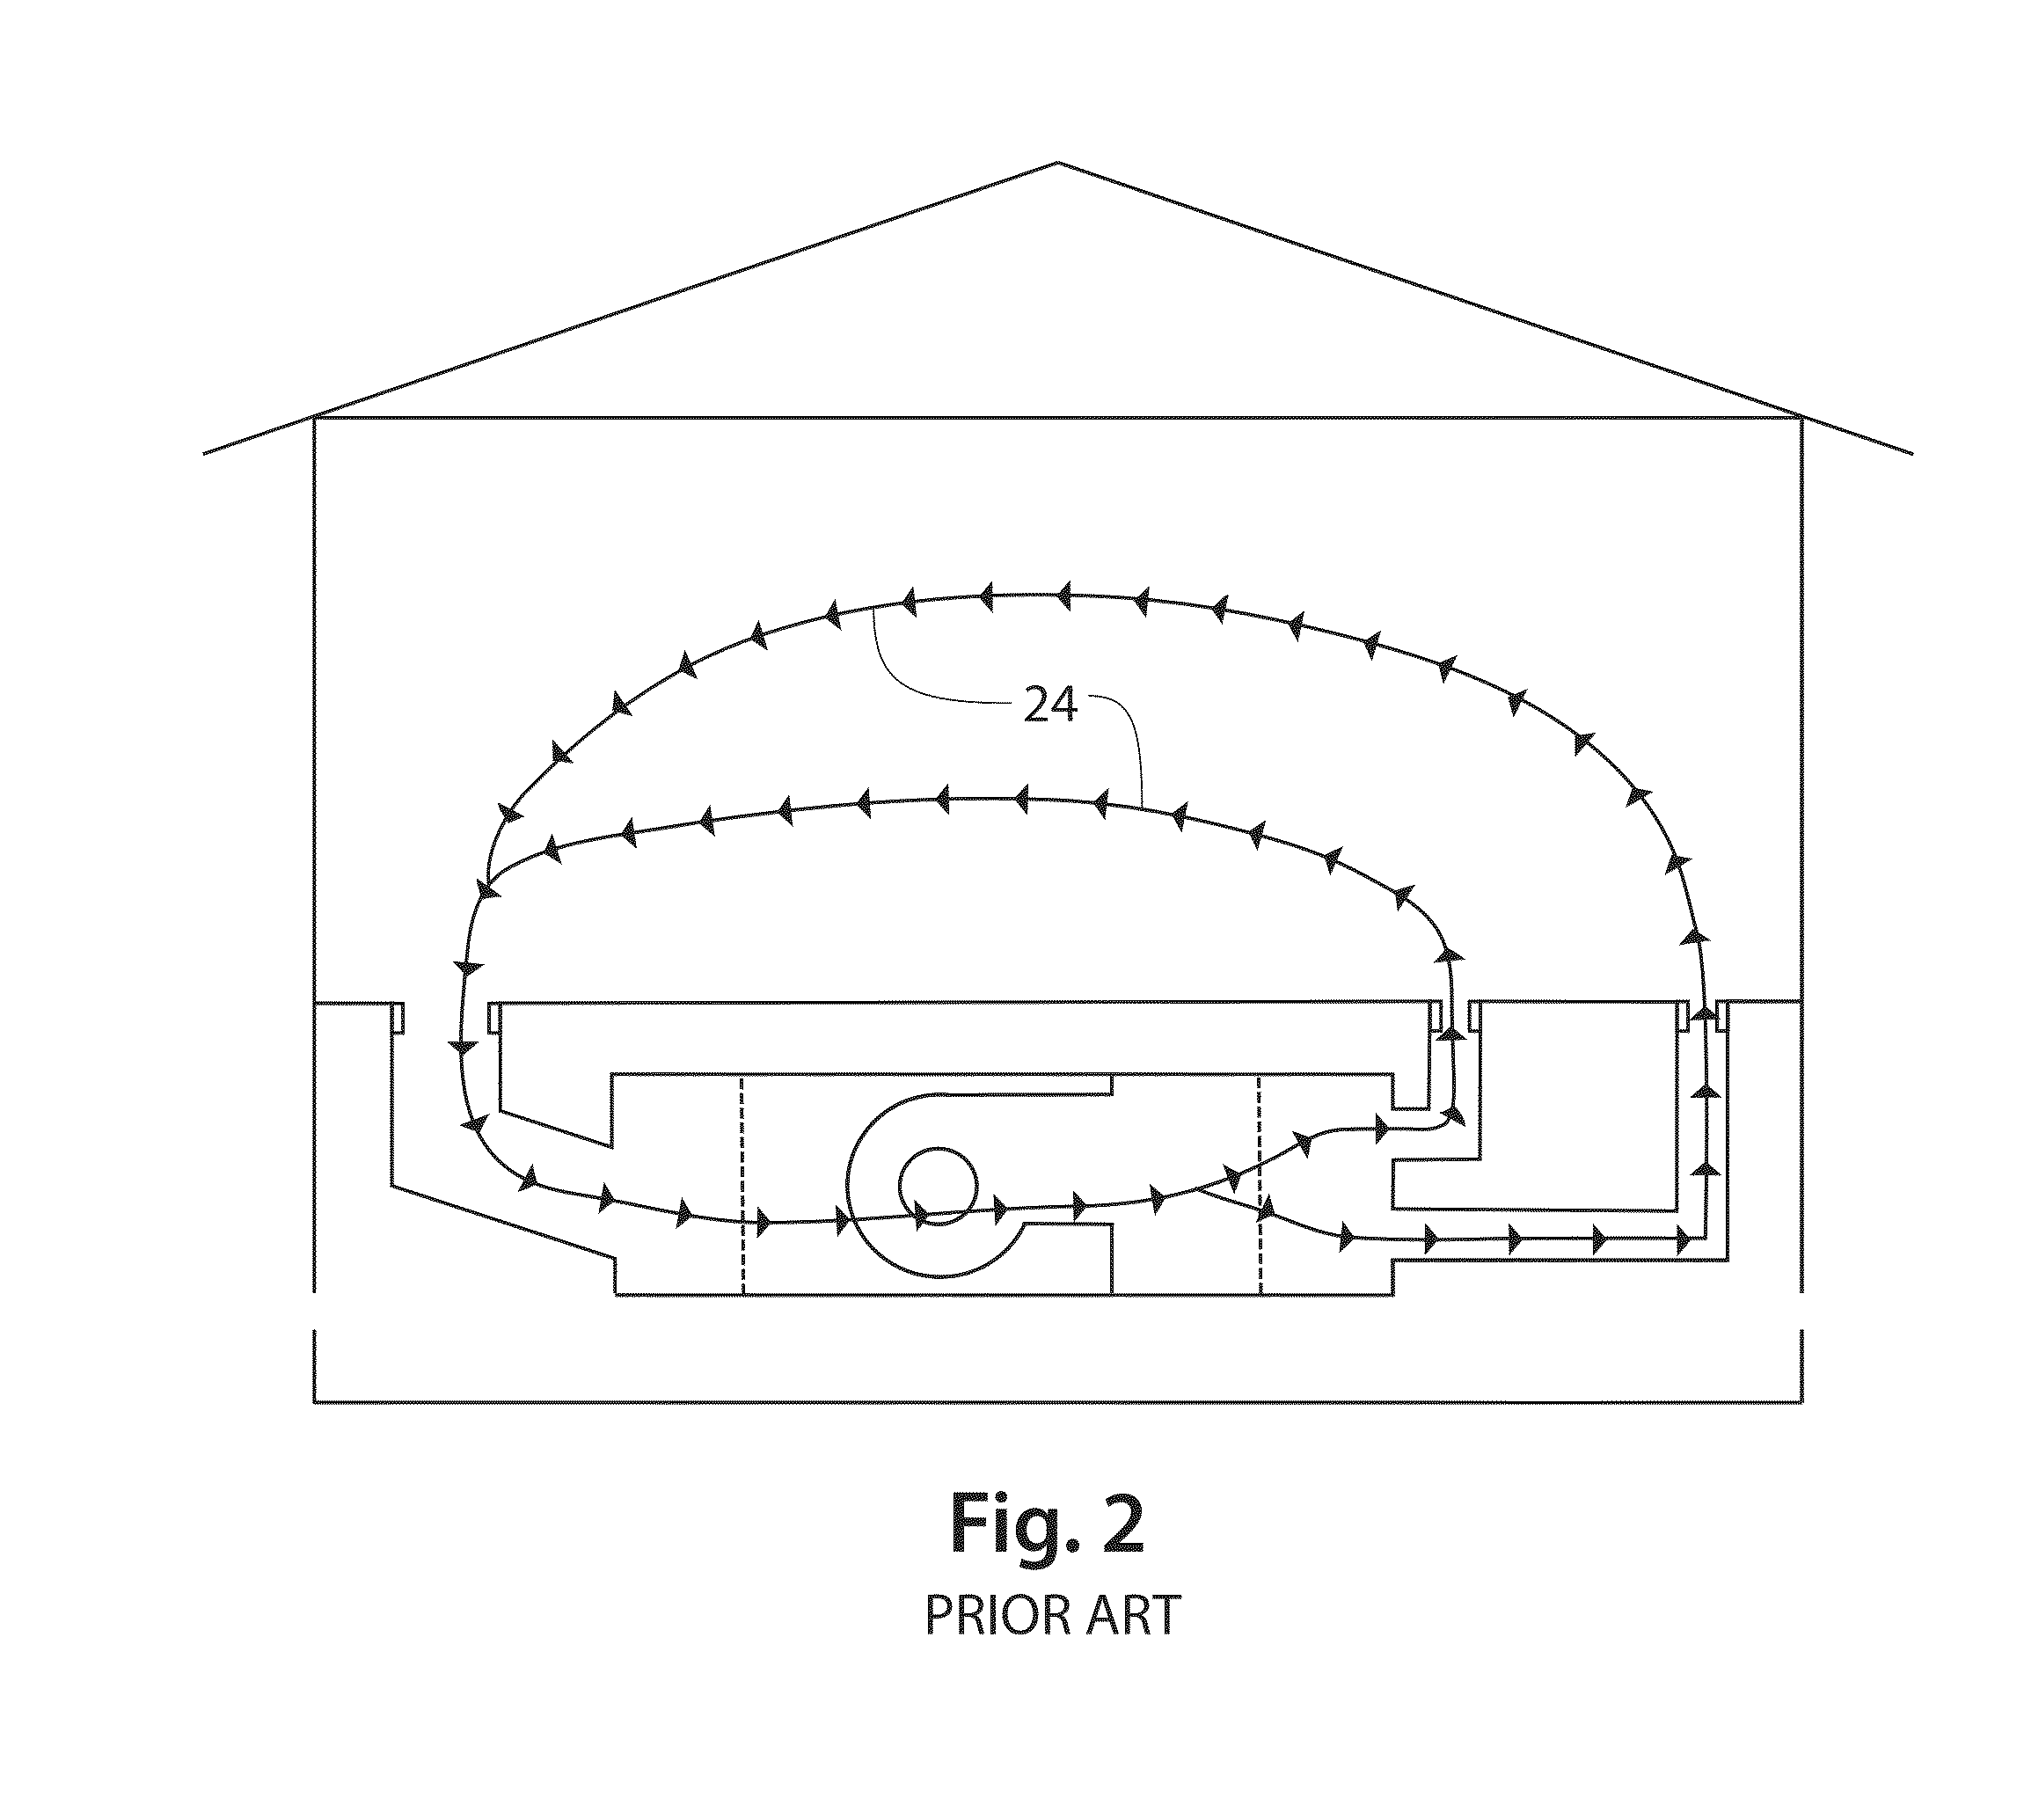 Method and system using an HVAC air handler and thermostat for building energy loss testing, monitoring and cost control